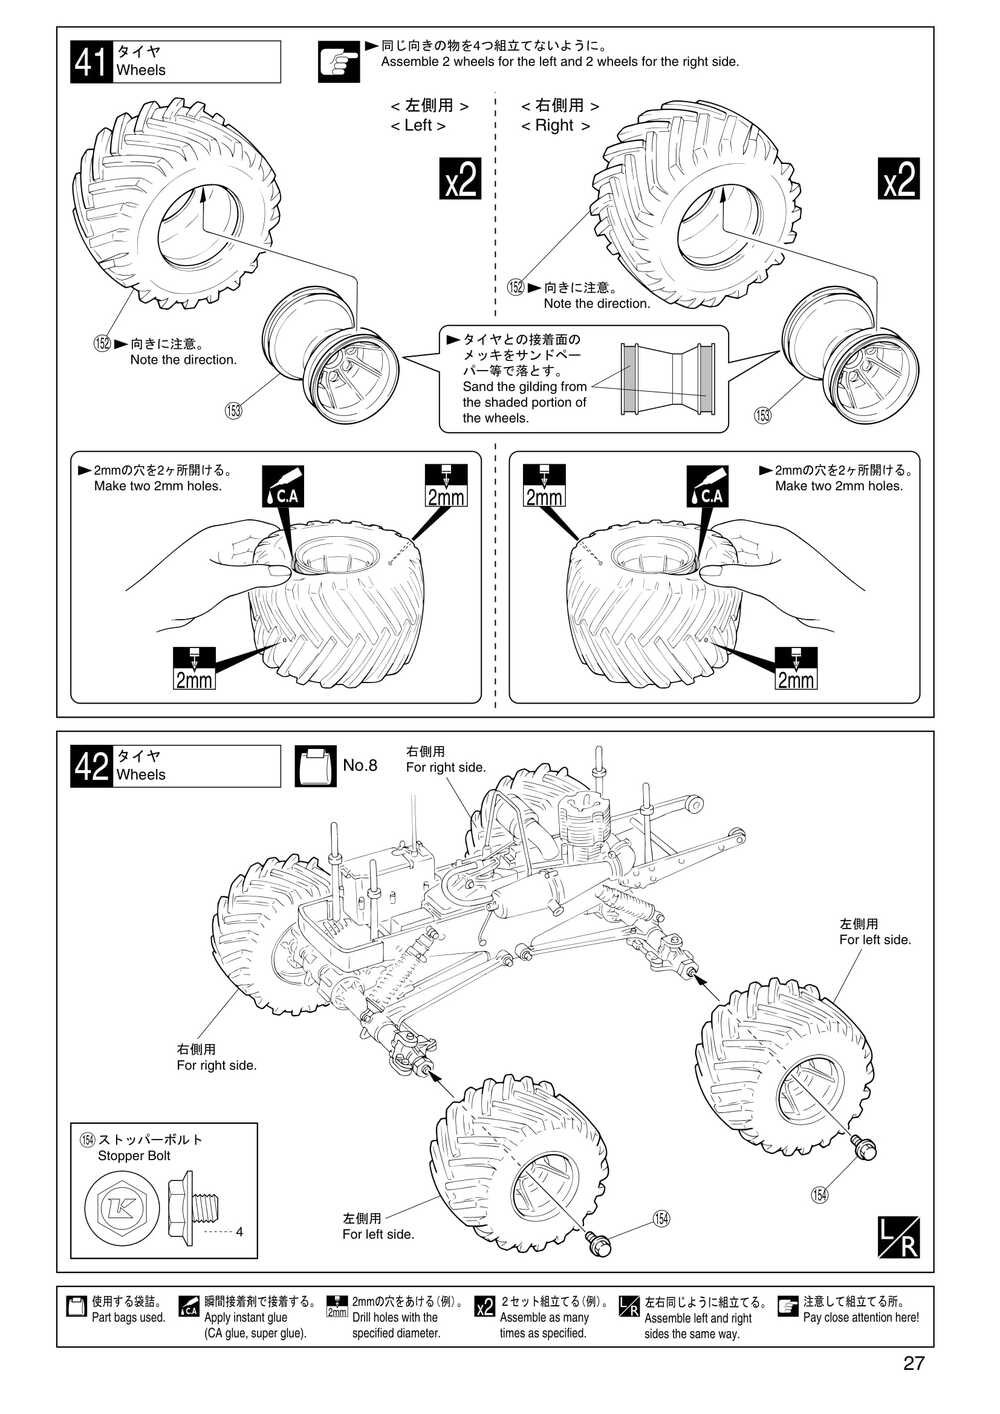 Kyosho - 31221 - Mad-Force - Manual - Page 27